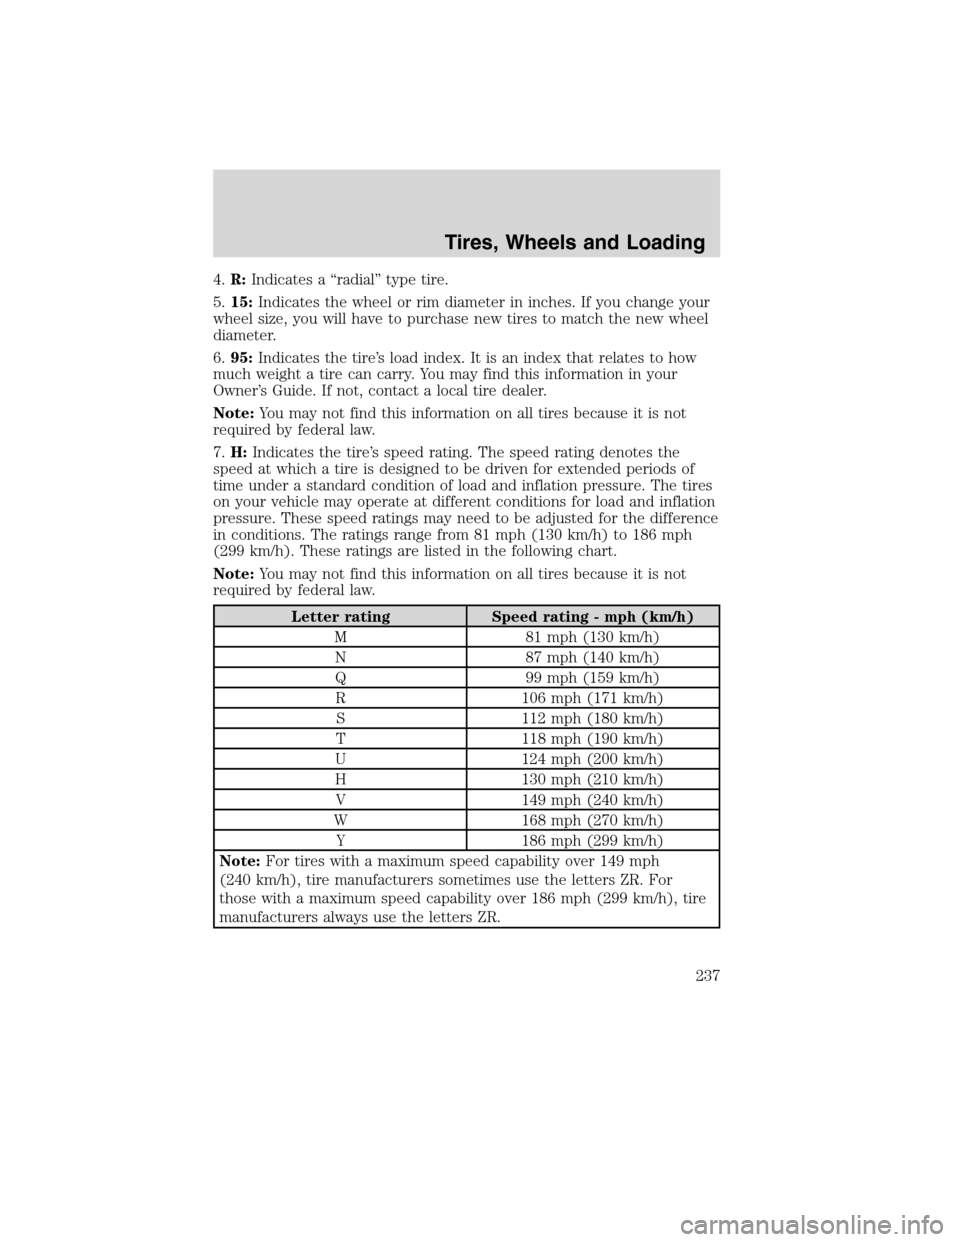 Mercury Mountaineer 2010  Owners Manuals 4.R:Indicates a “radial” type tire.
5.15:Indicates the wheel or rim diameter in inches. If you change your
wheel size, you will have to purchase new tires to match the new wheel
diameter.
6.95:Ind